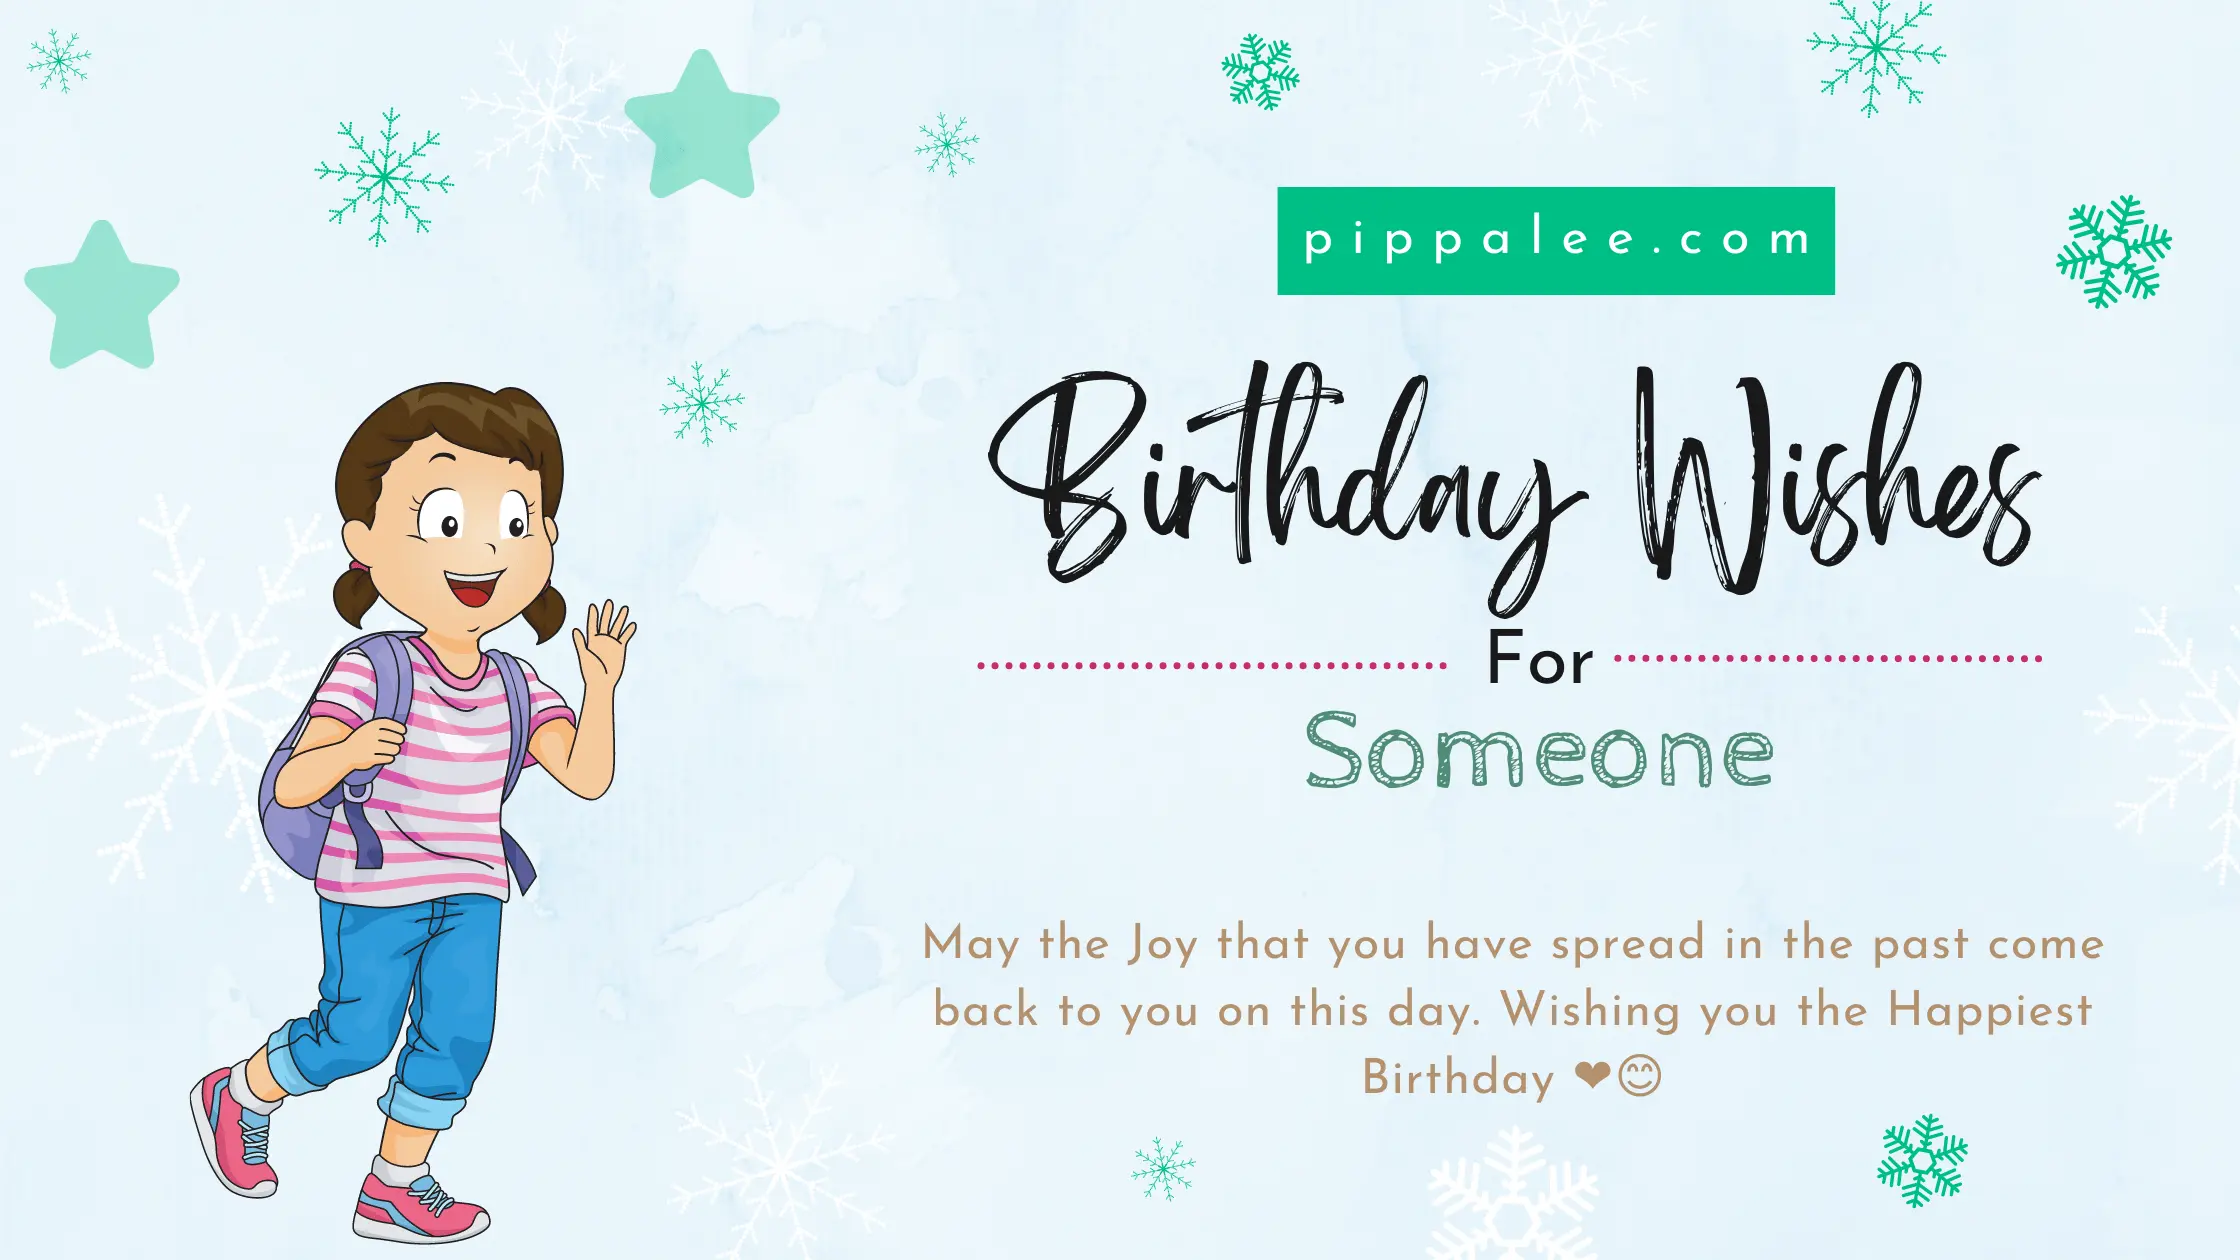 Birthday Wishes For Someone - Special Wishes